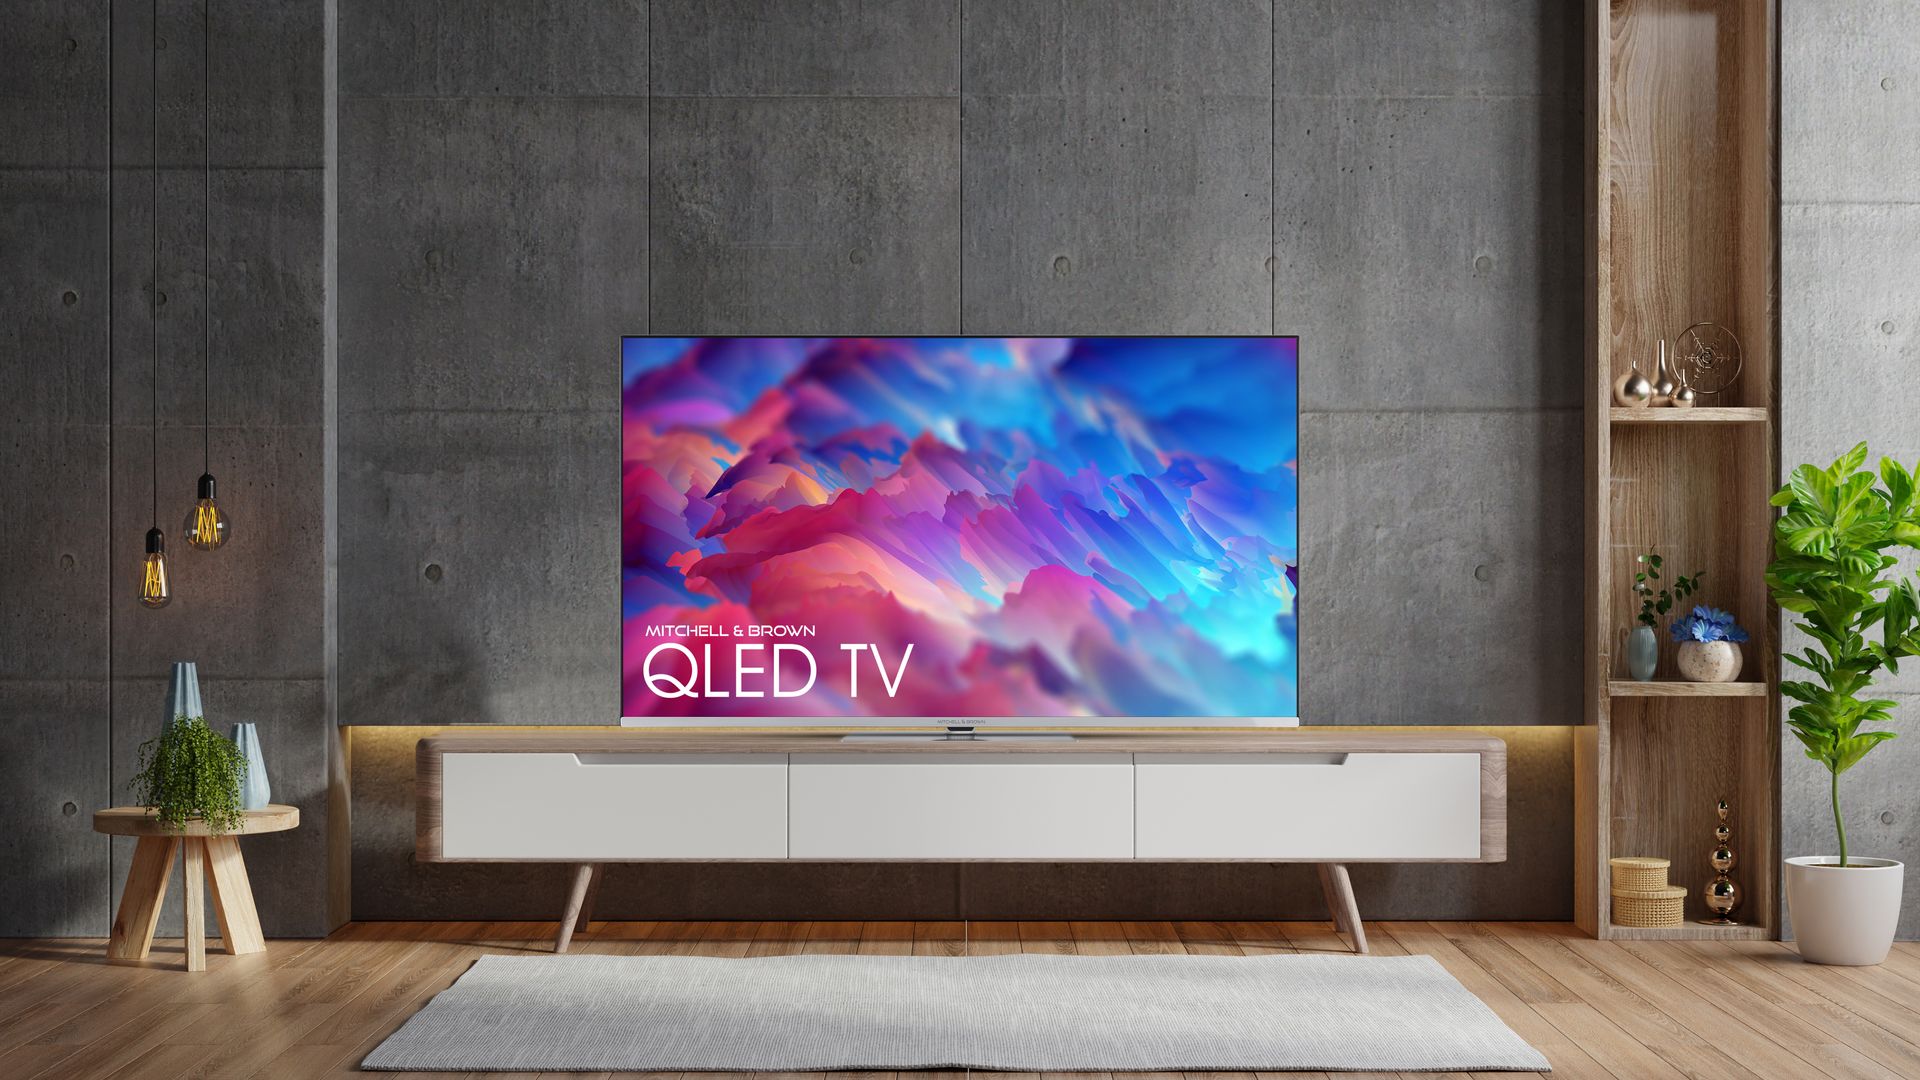 British brand Mitchell & Brown now has a QLED TV range starting at just ...